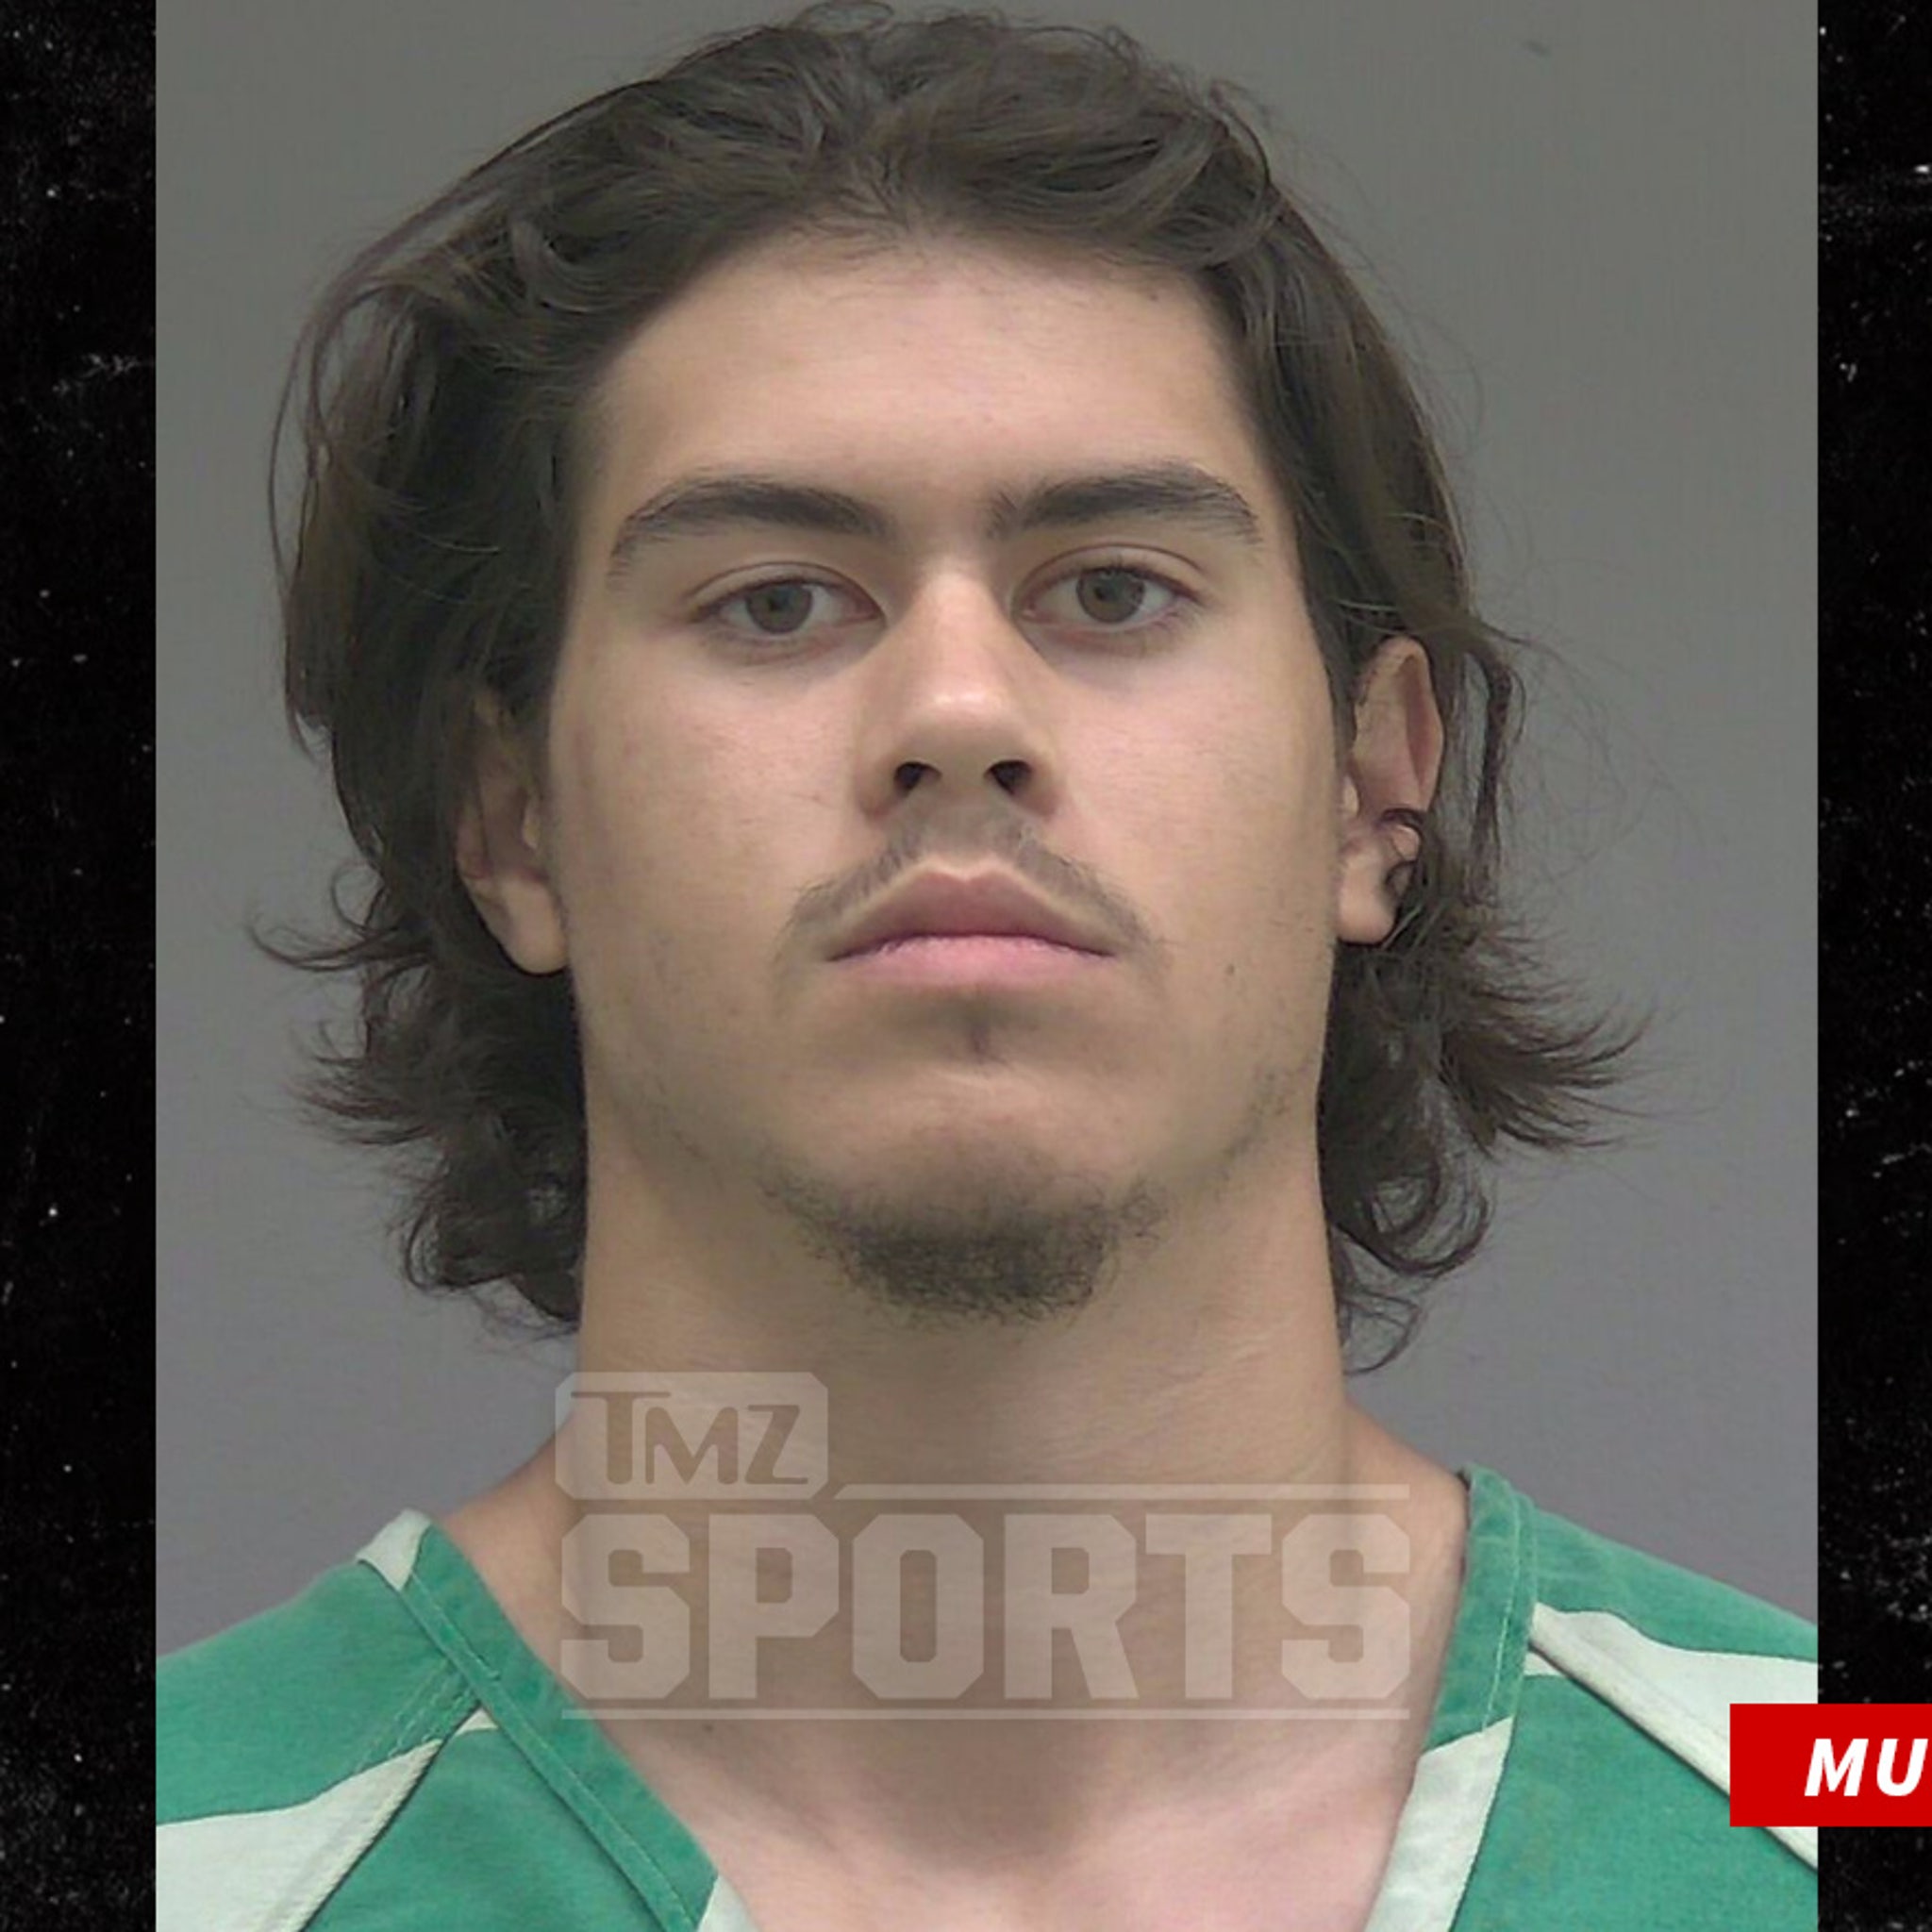 UF QB Jalen Kitna Shared Image Of Adult Male Having Sex With Child, Cops pic